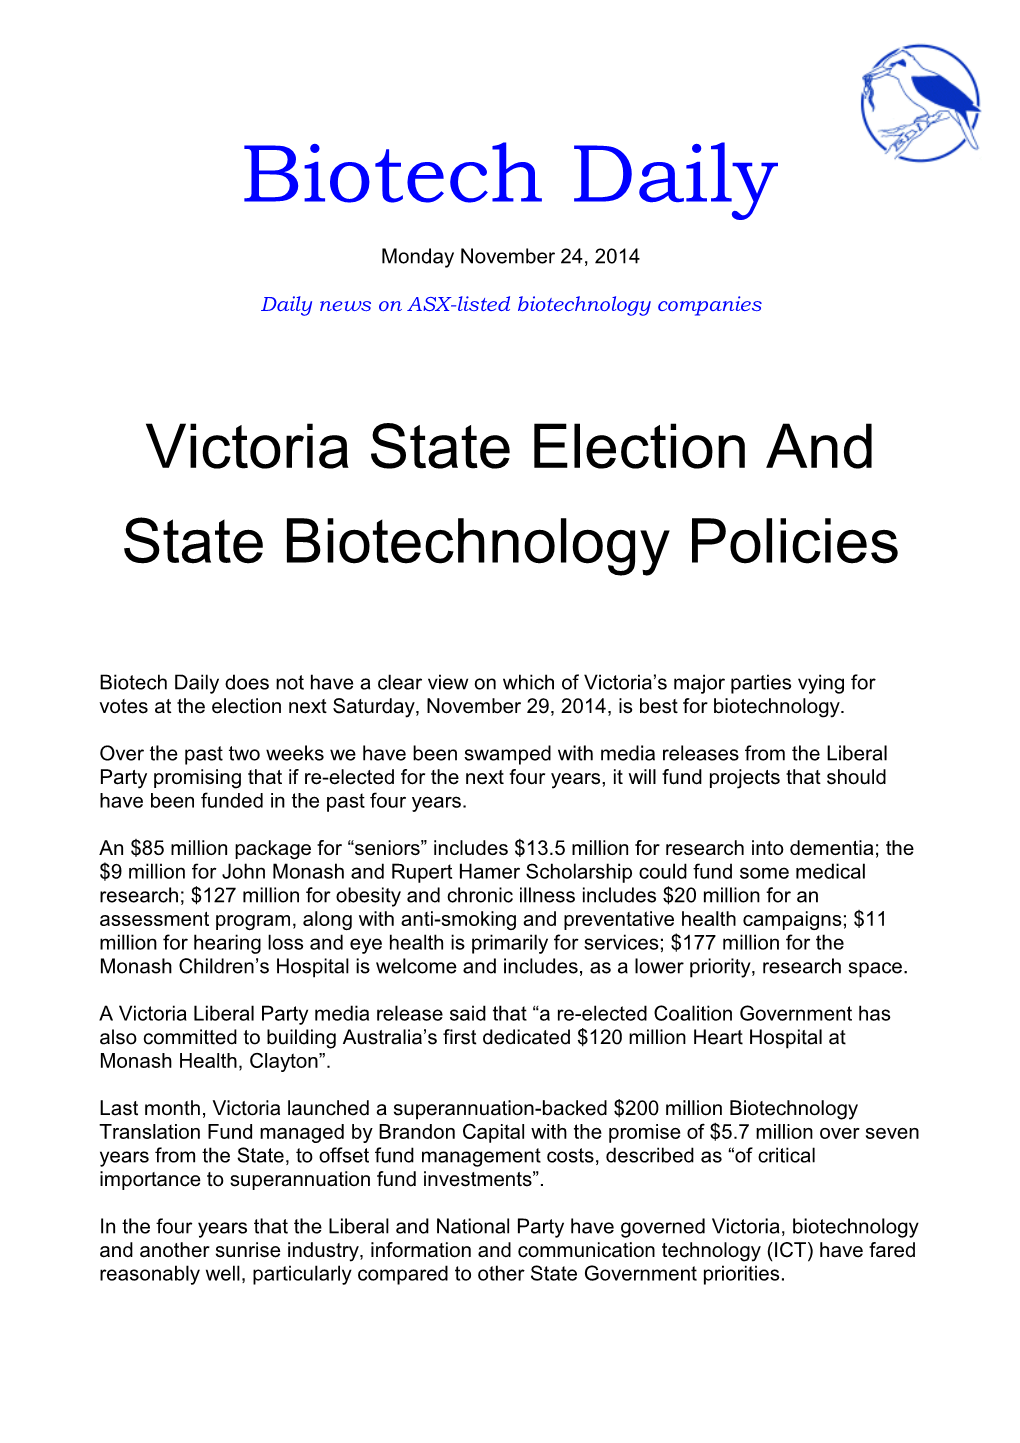 Victoria State Election and State Biotechnology Policies